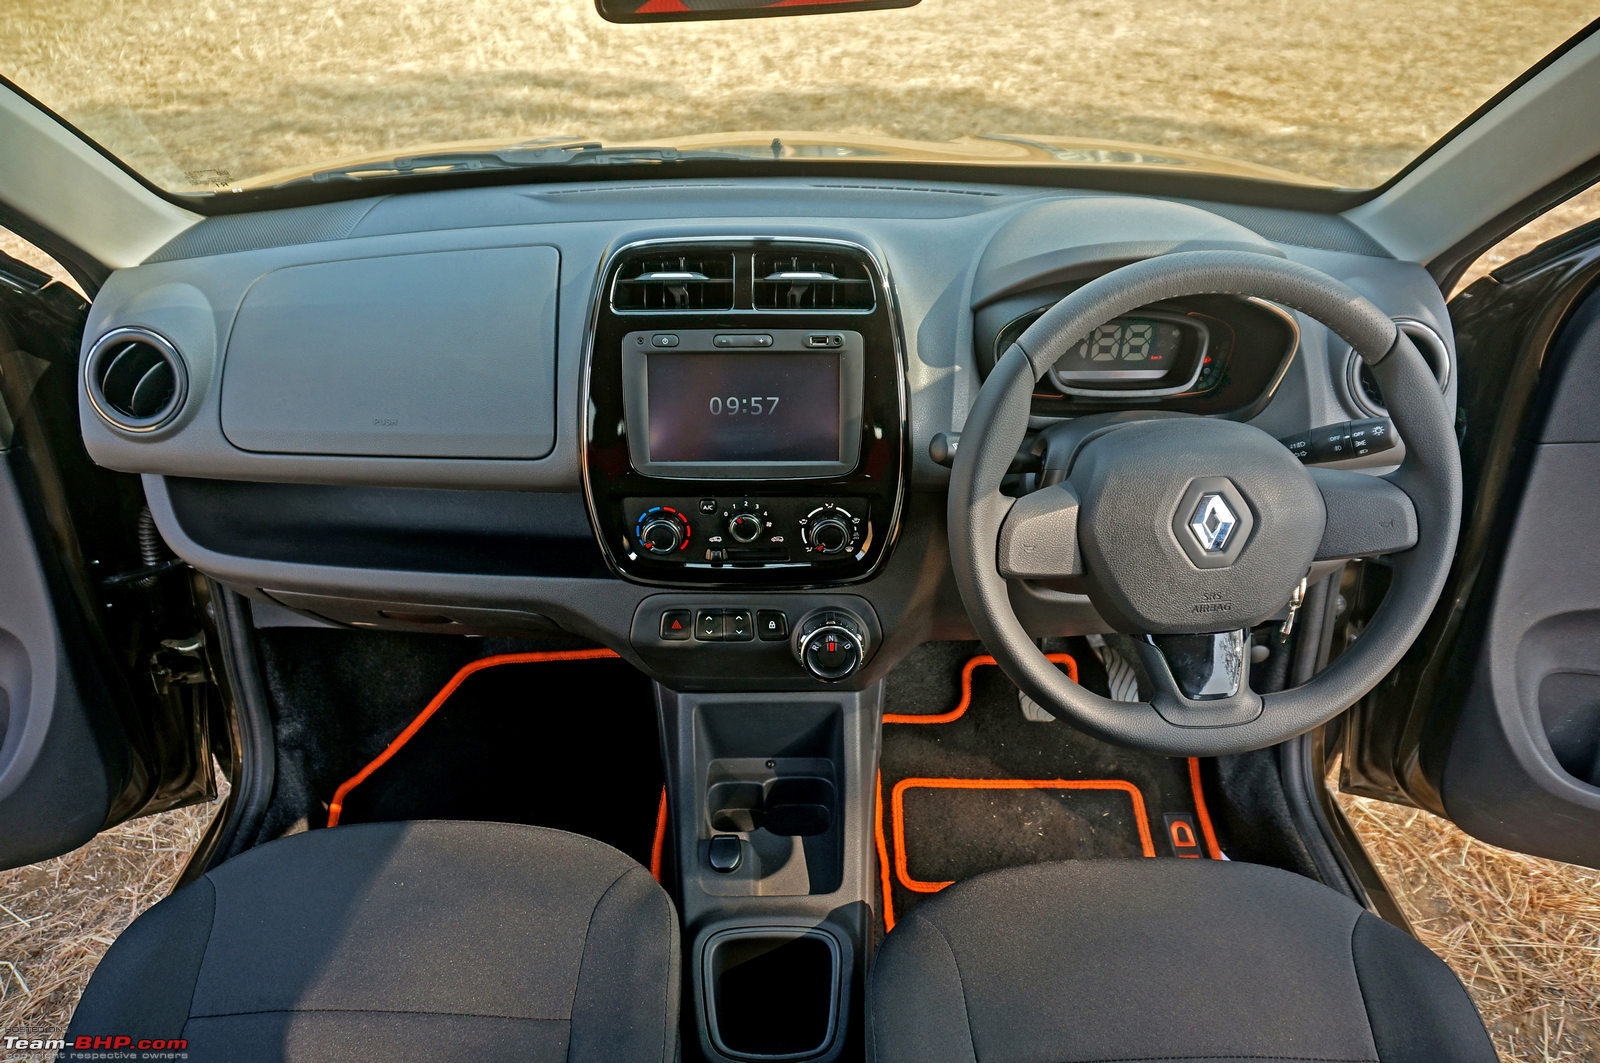 Renault Kwid AMT (Automatic) : Official Review - Team-BHP